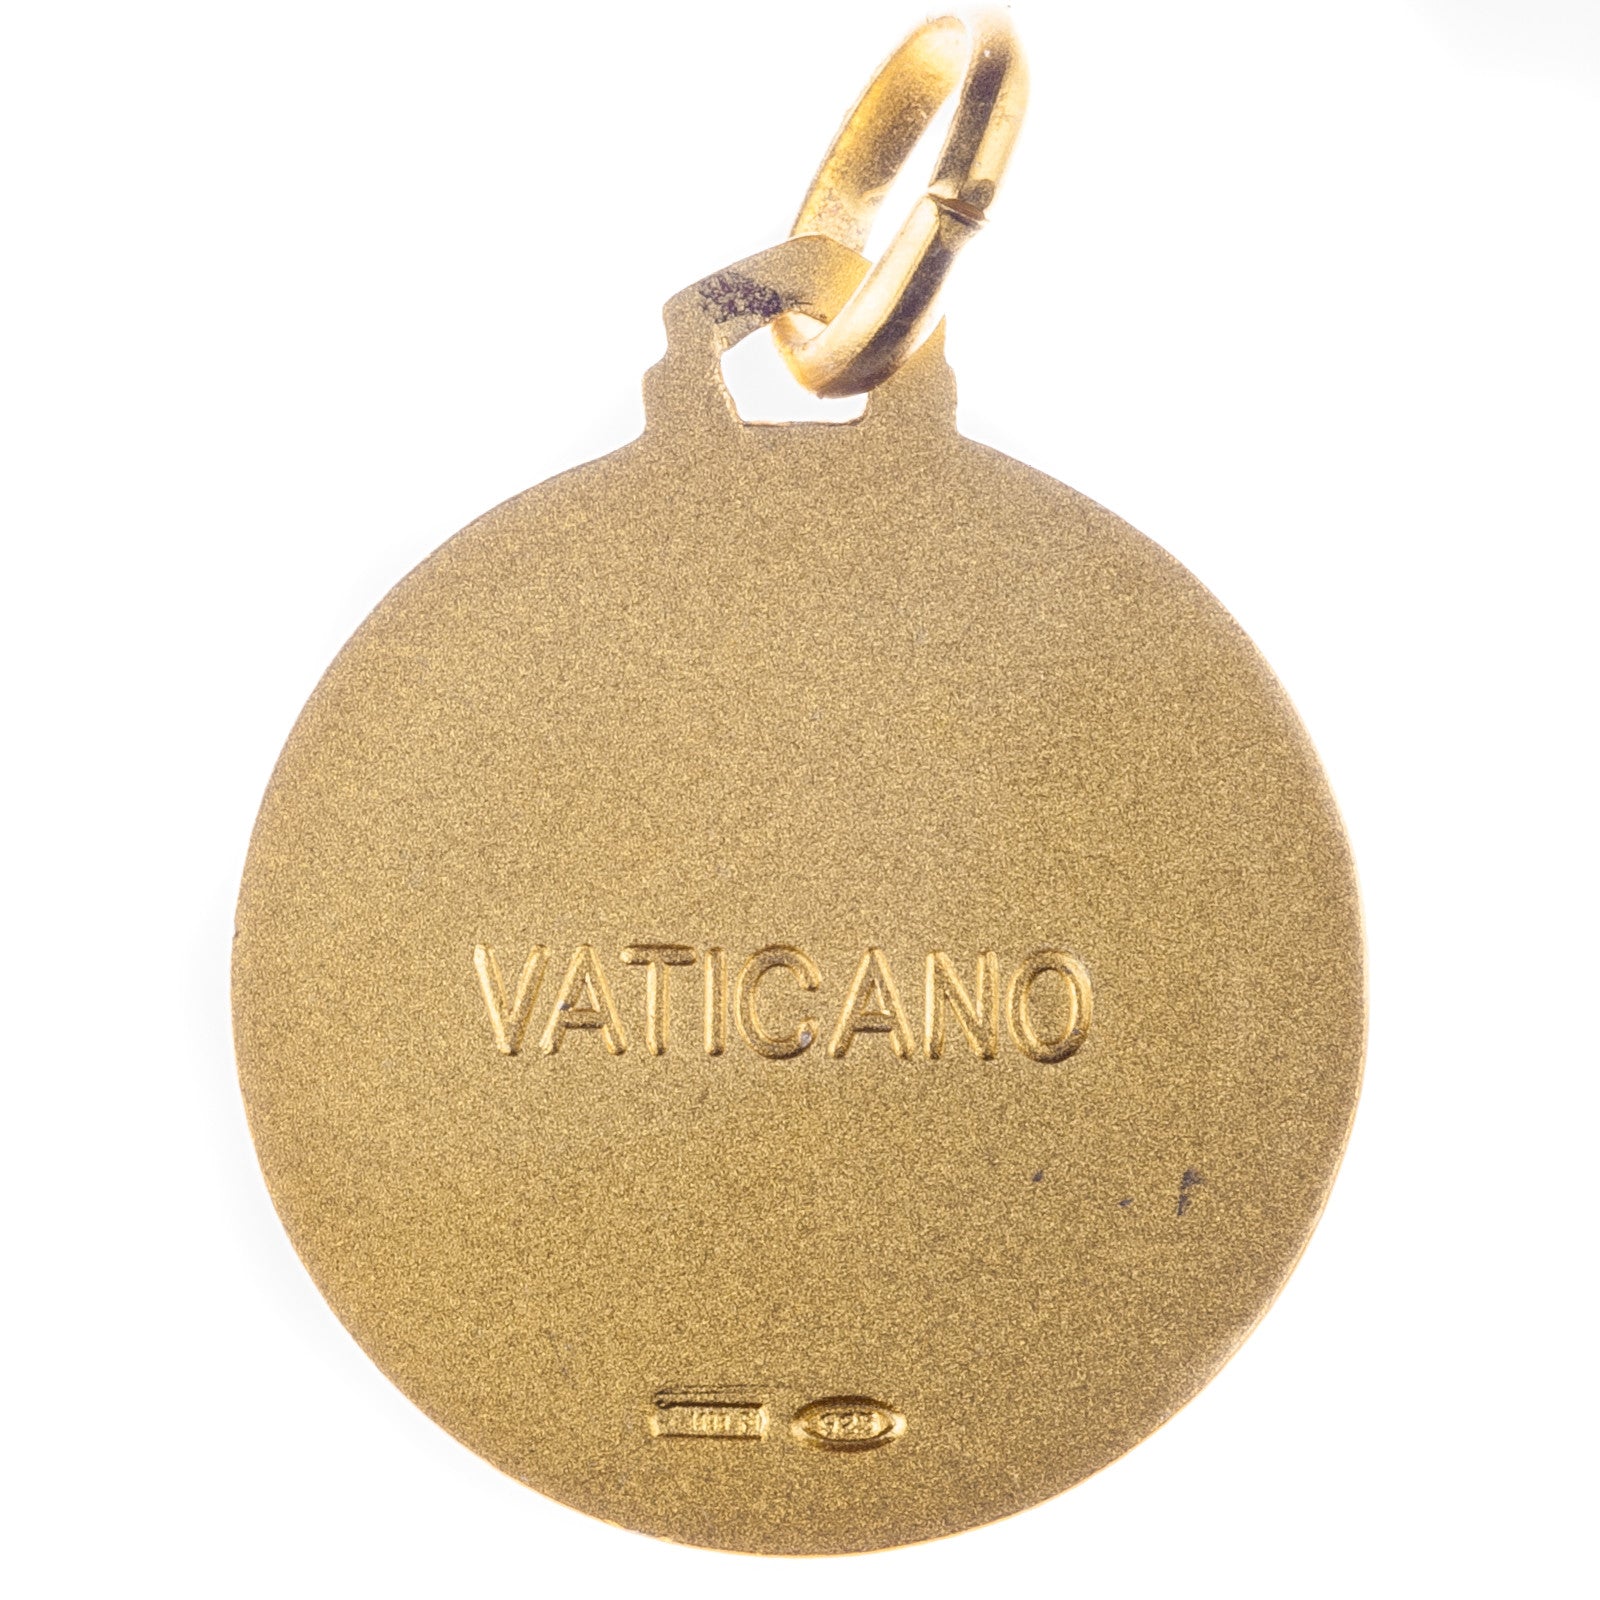 SILVER GOLD PLATED MEDAL OF POPE FRANCIS - Nuova Galleria Mariana s.r.l - 2